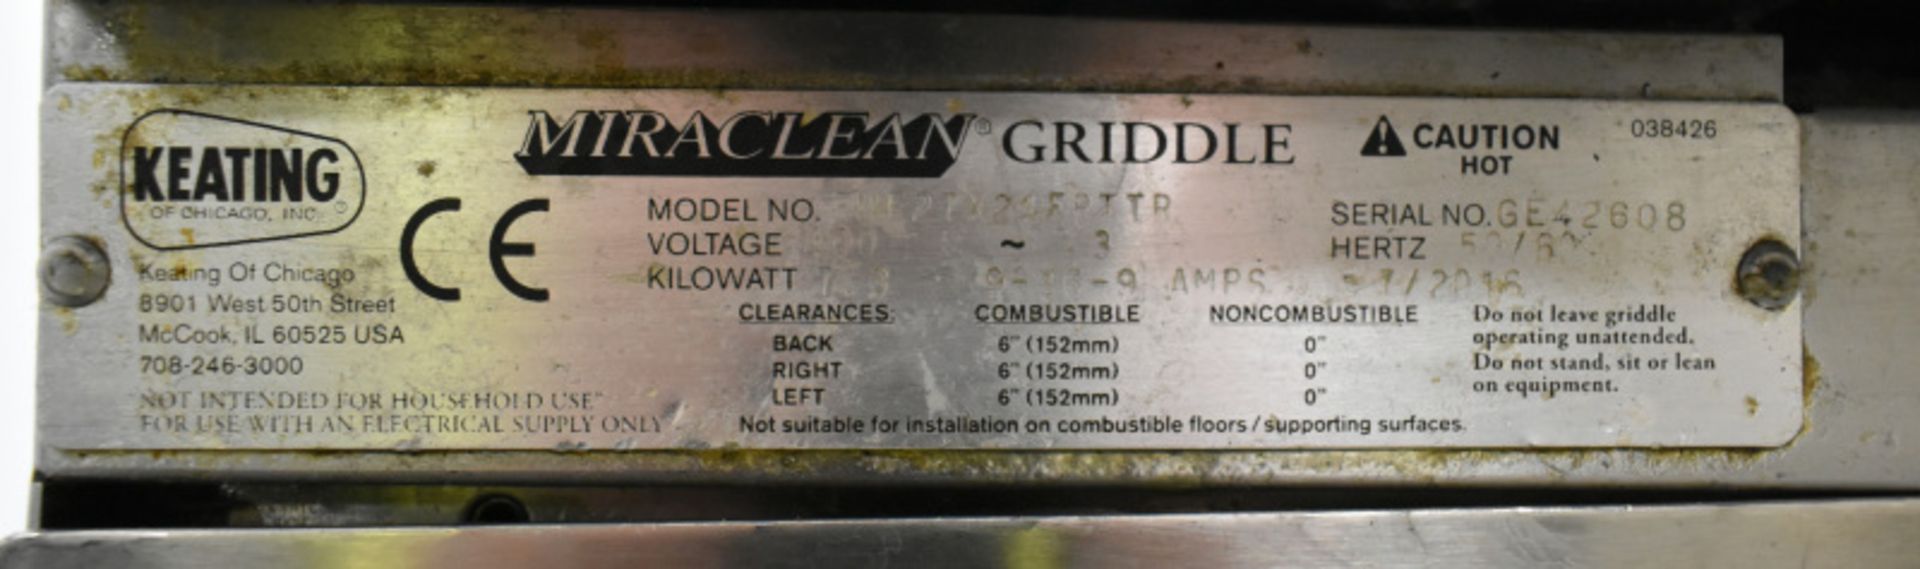 Miraclean Griddle - Image 7 of 7